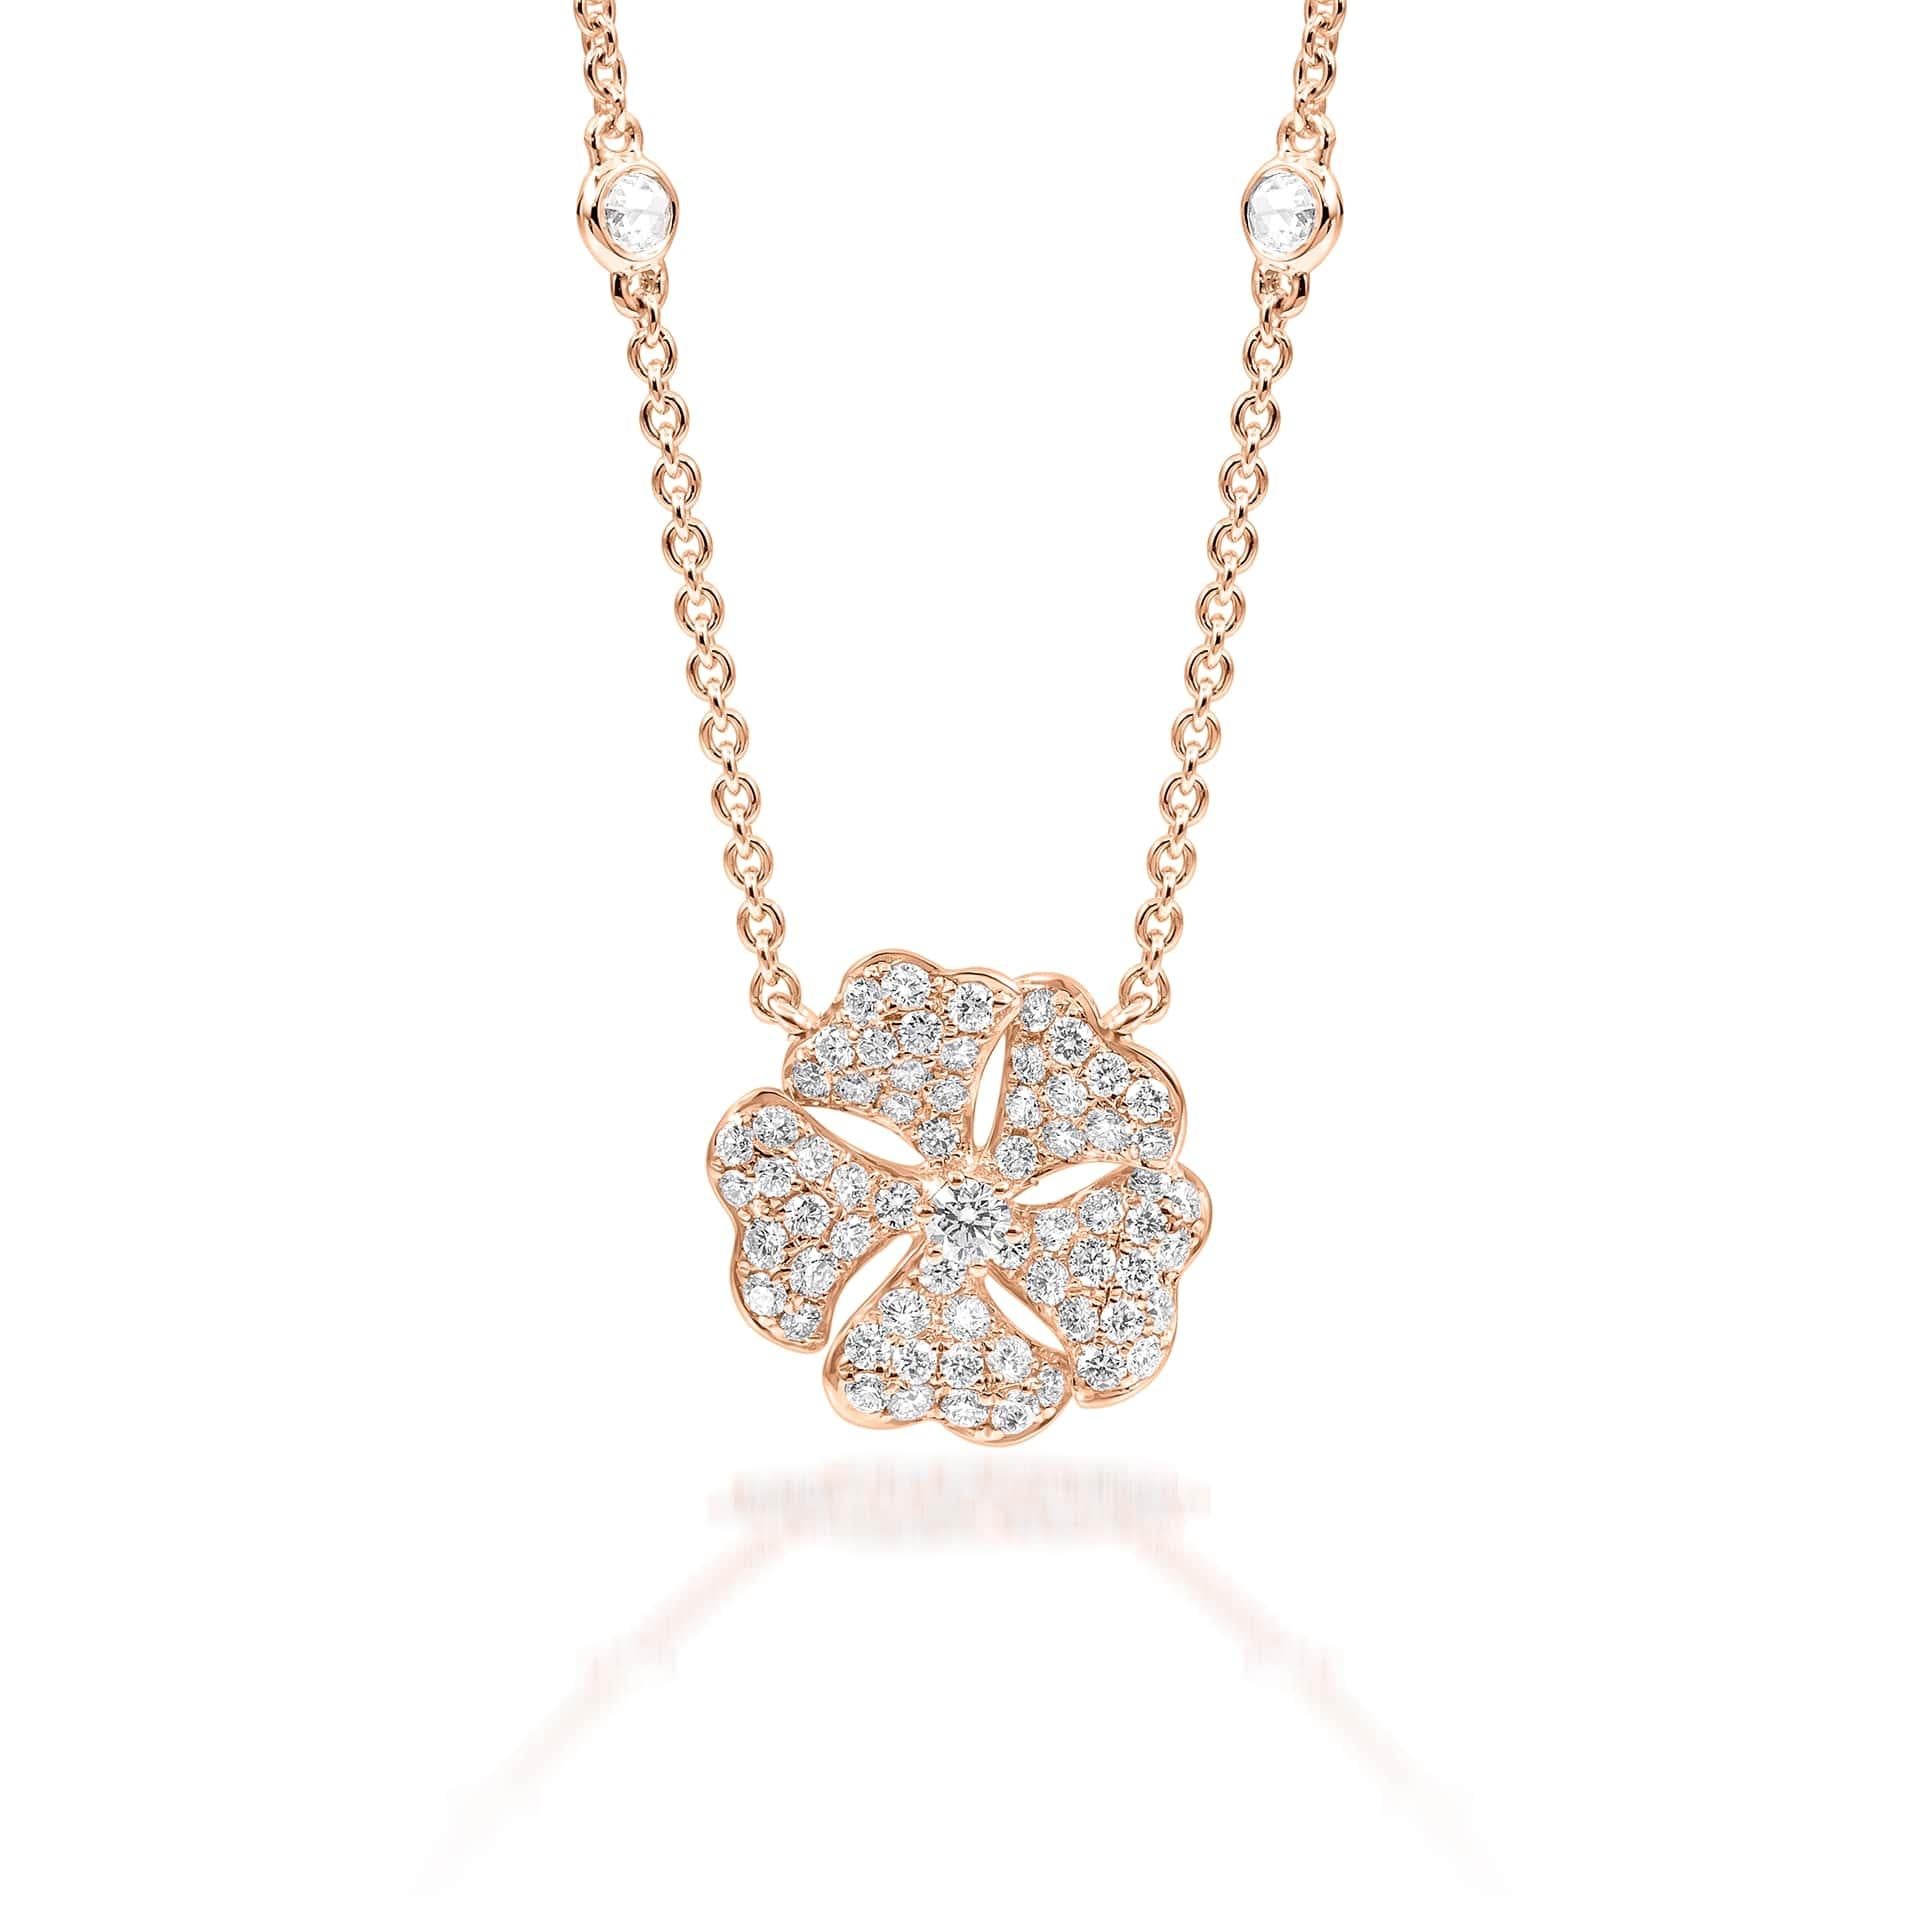 Bloom Diamond Solo Flower Necklace in 18K Rose Gold

Inspired by the exquisite petals of the alpine cinquefoil flower, the Bloom collection combines the richness of diamonds and precious metals with the light versatility of this delicate,